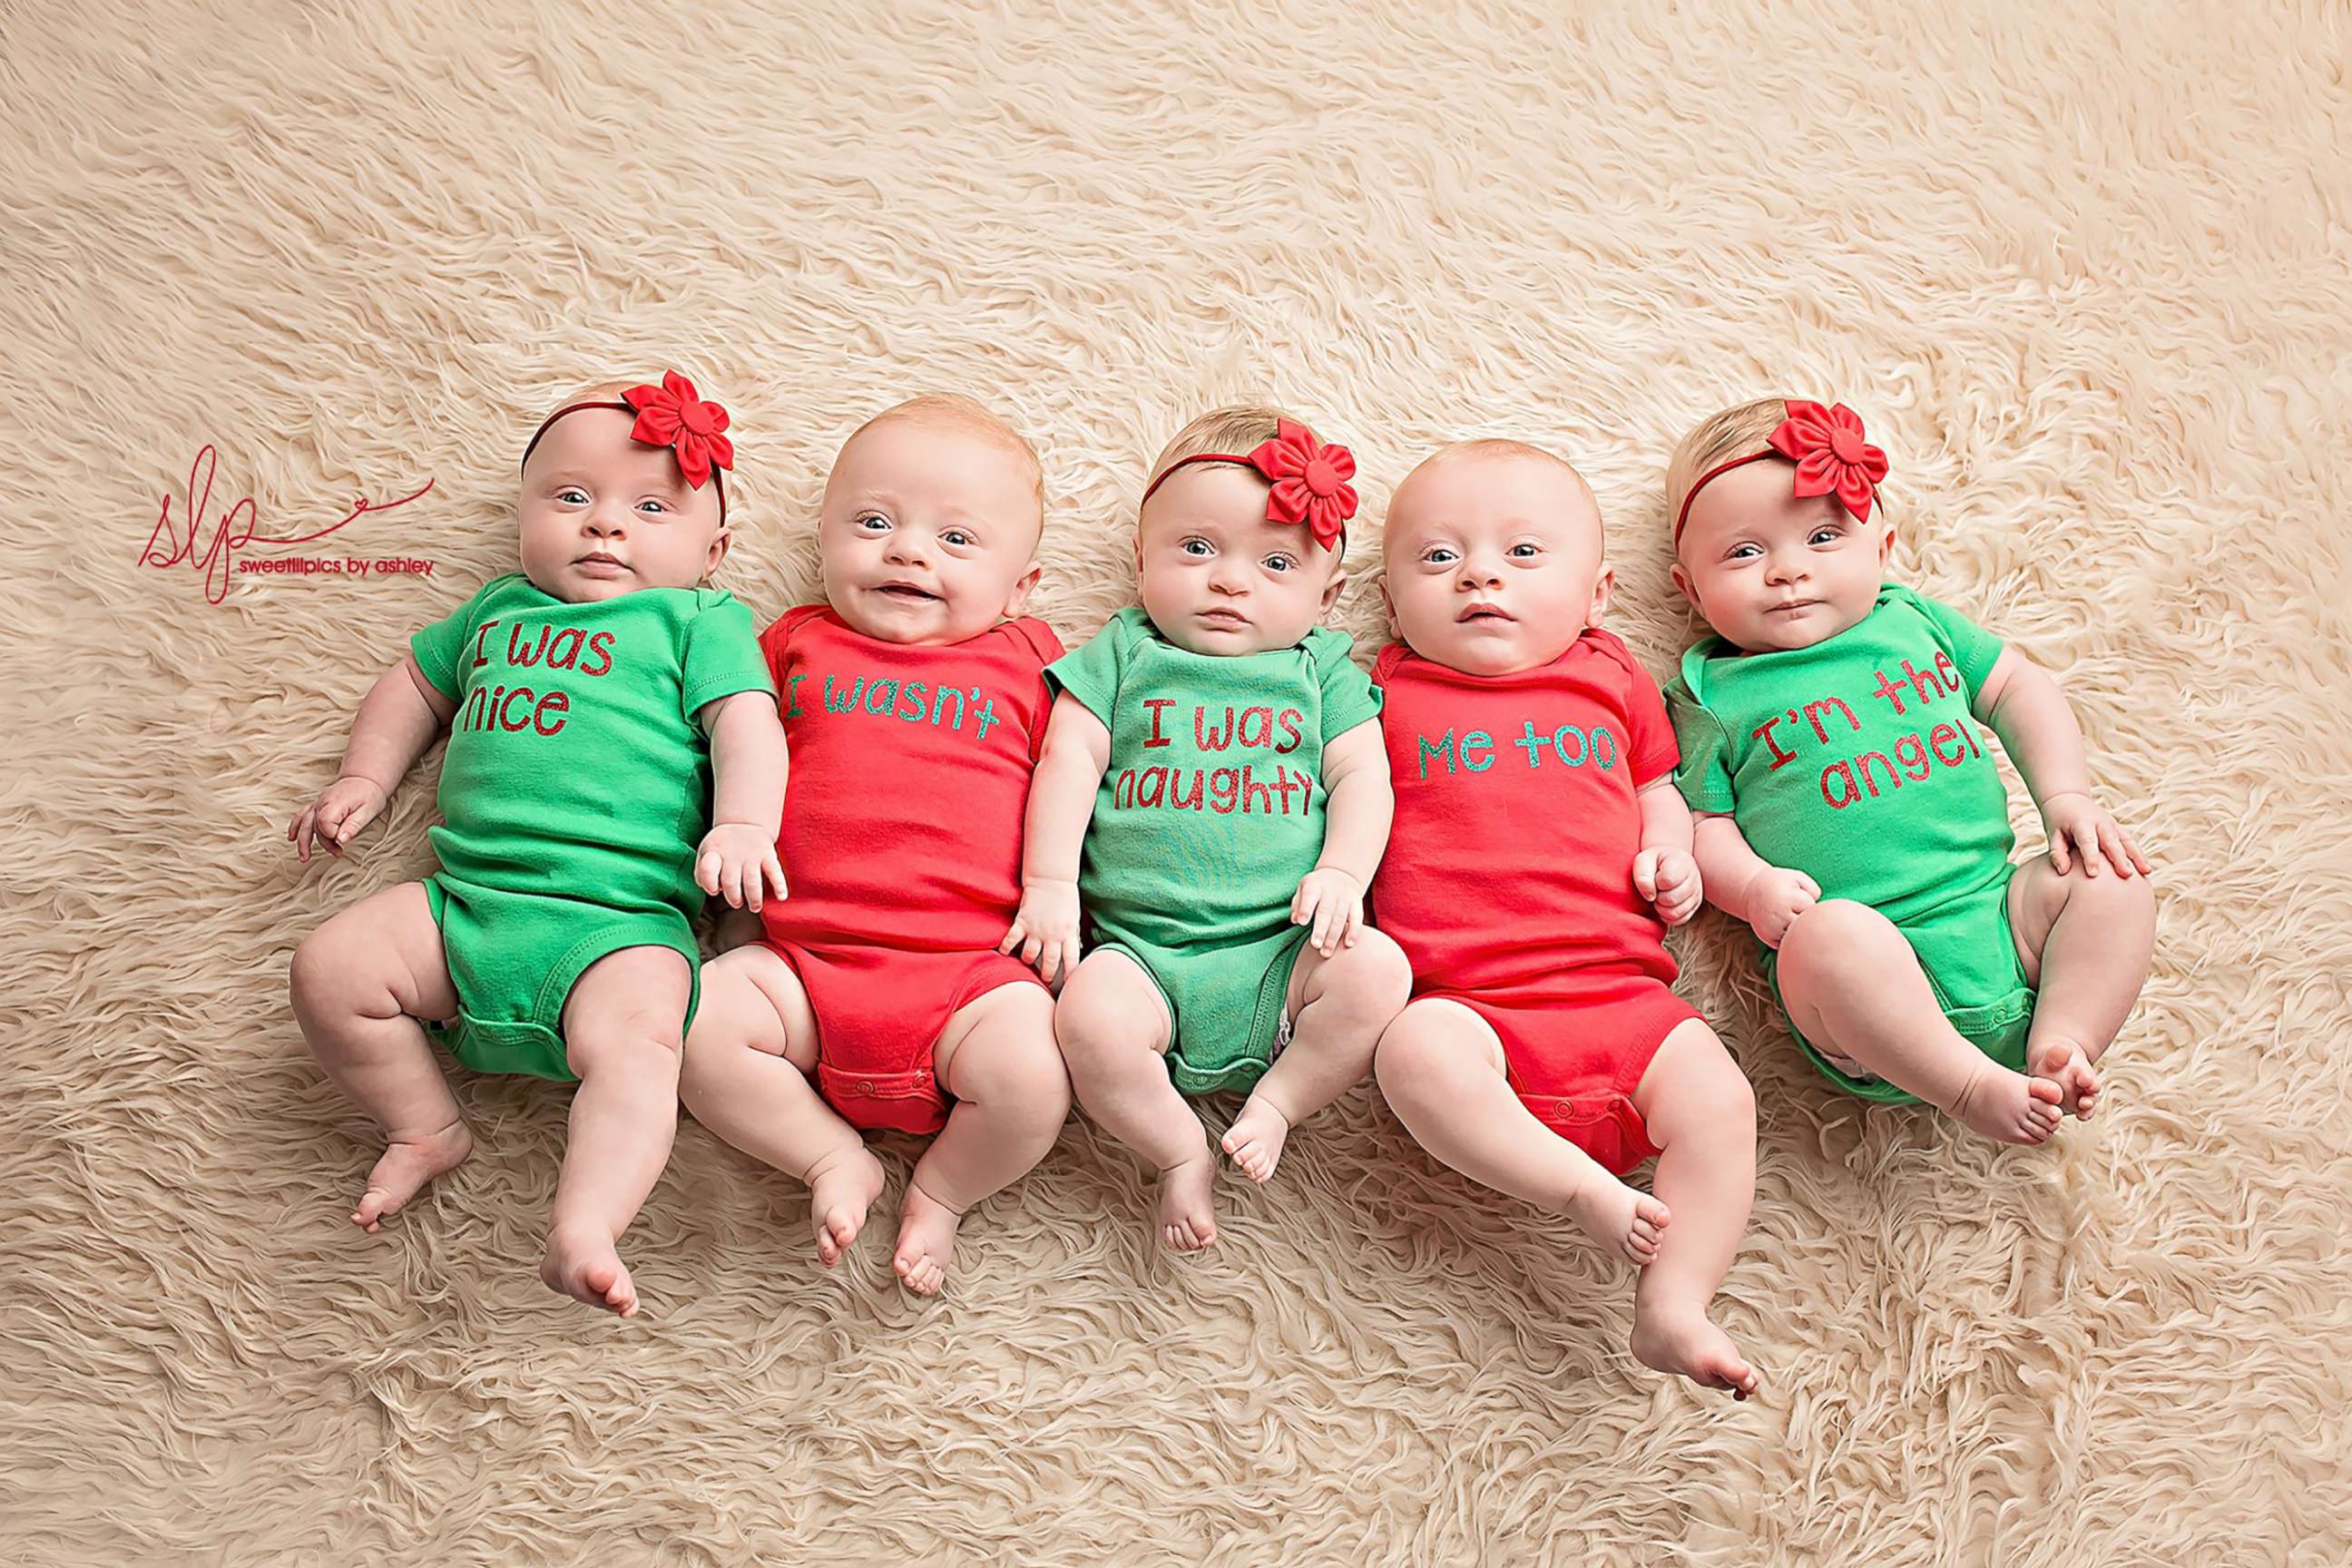 The Driskell quintuplets - Zoey, Asher, Dakota, Gavin and Hollyn, left to right pose in Christmas outfits.